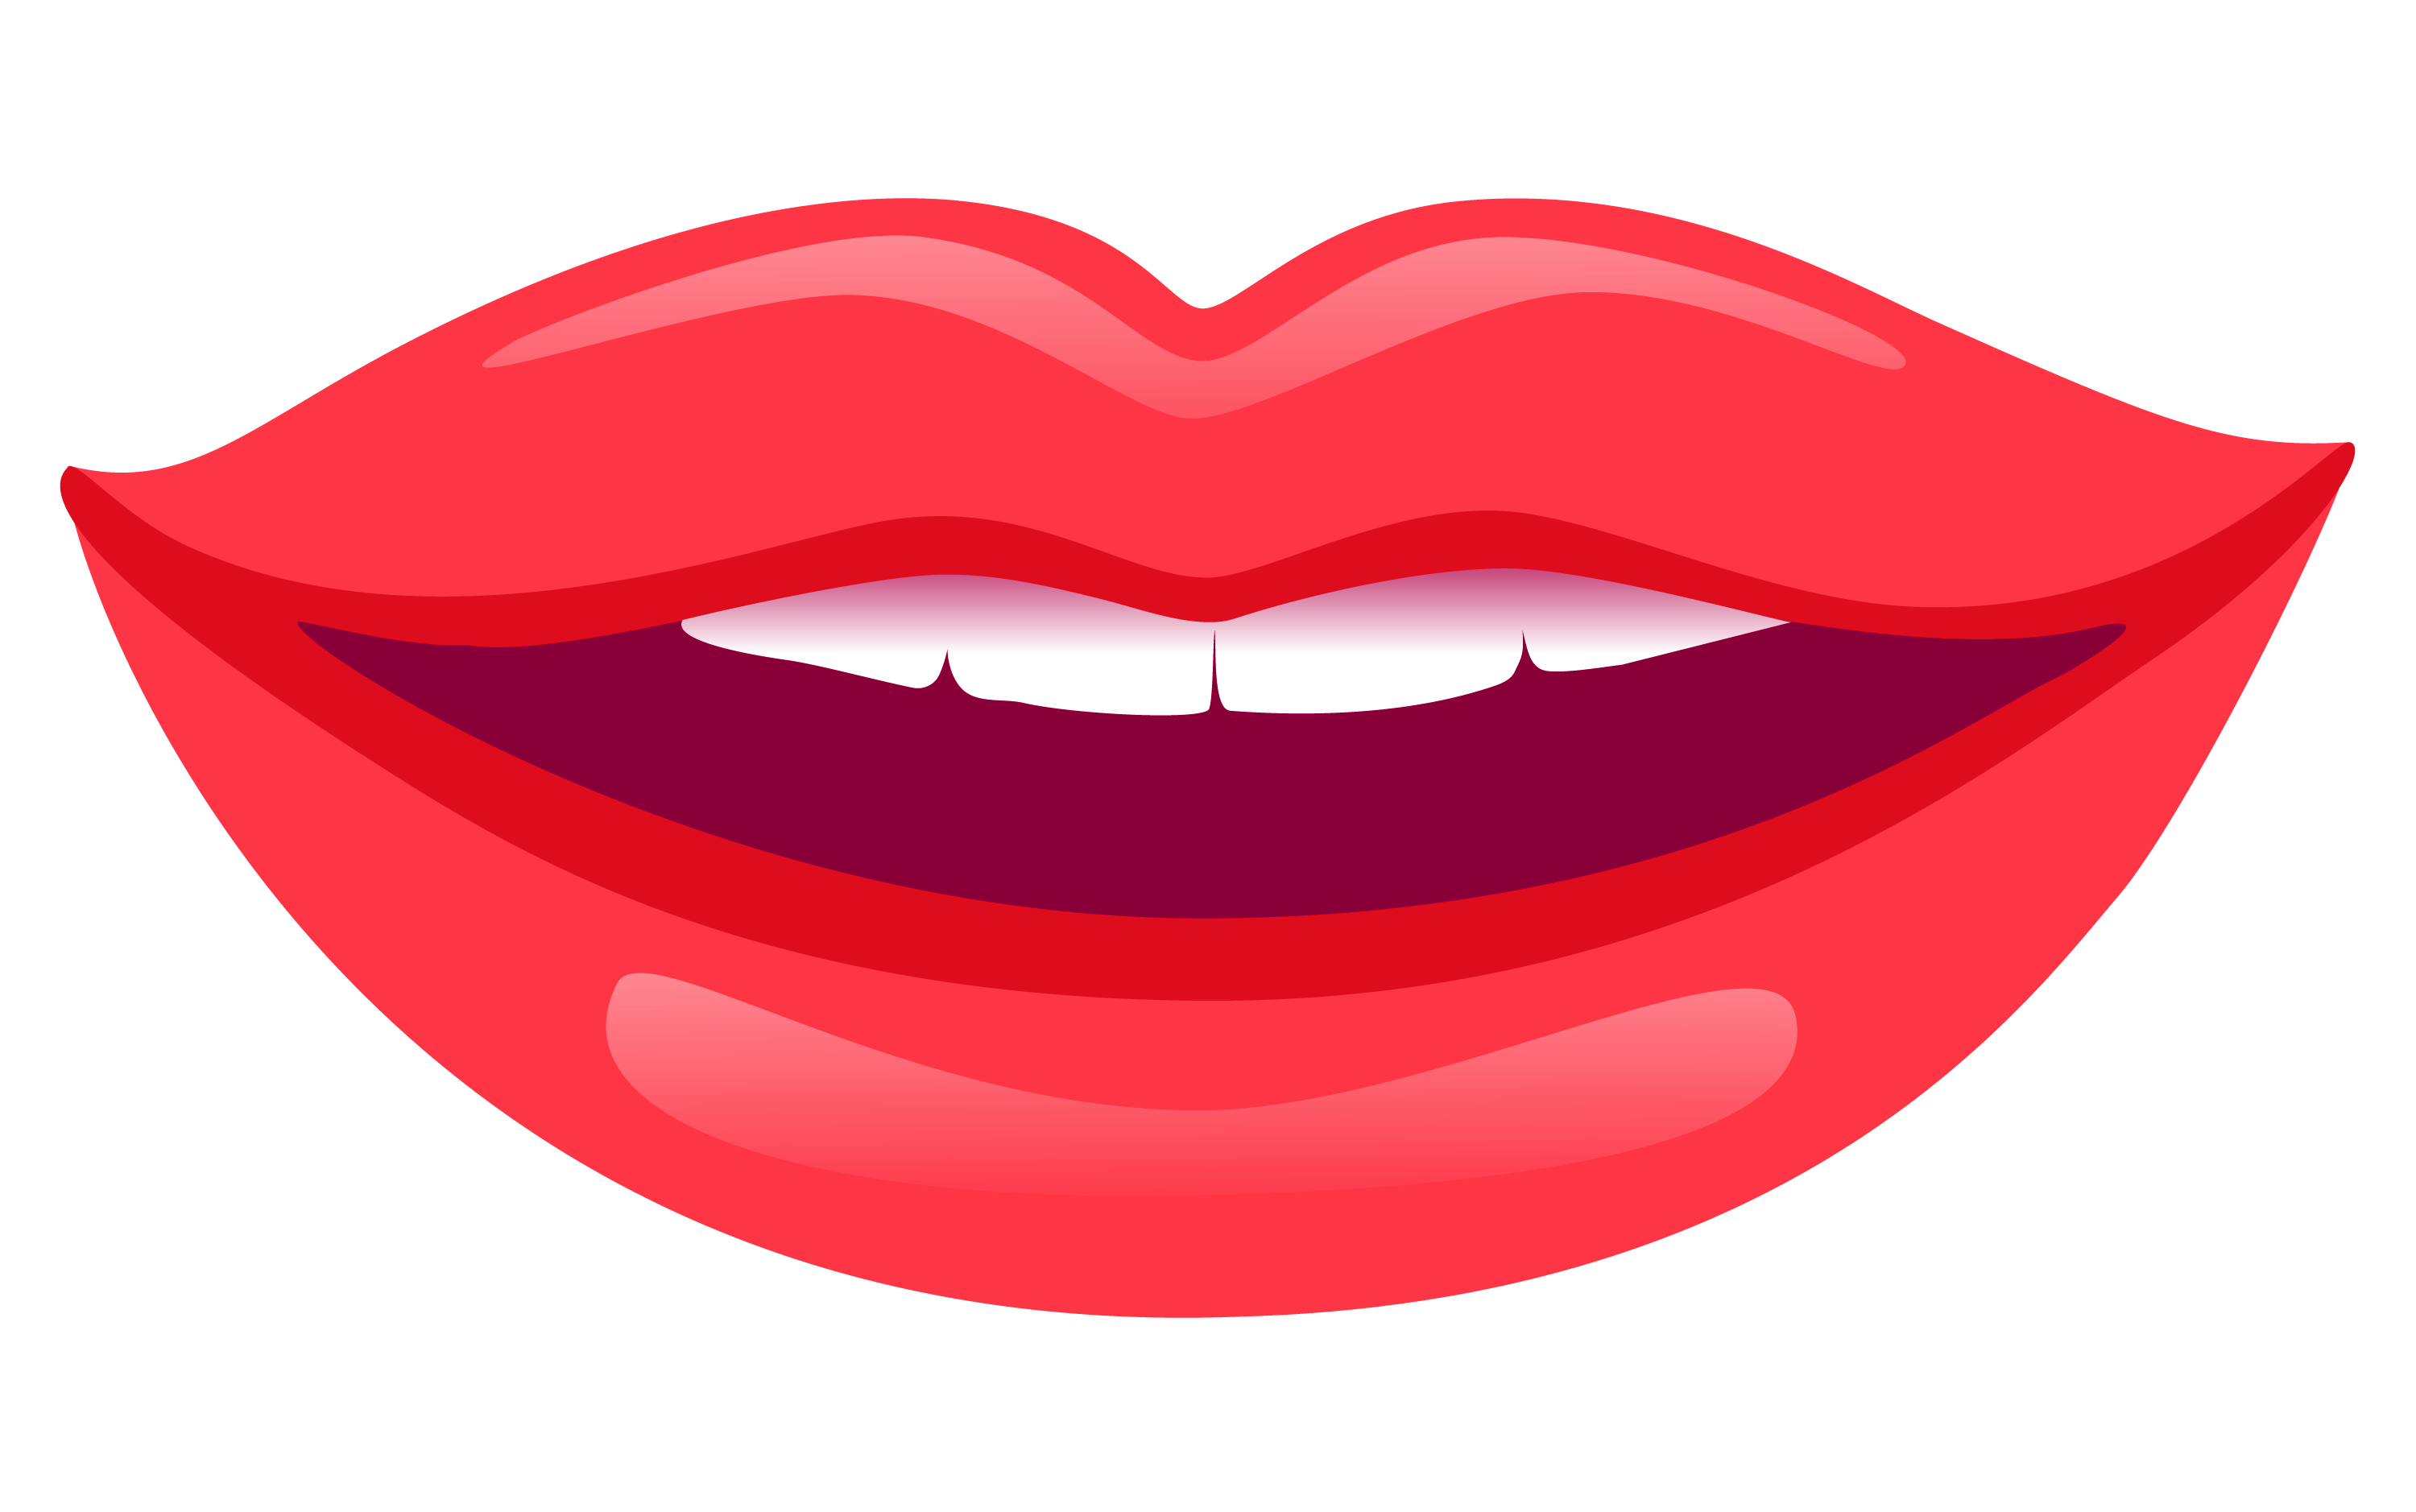 HQ Smiling Lips PNG HD Transparent Smiling Lips HD.PNG Images. PlusPNG